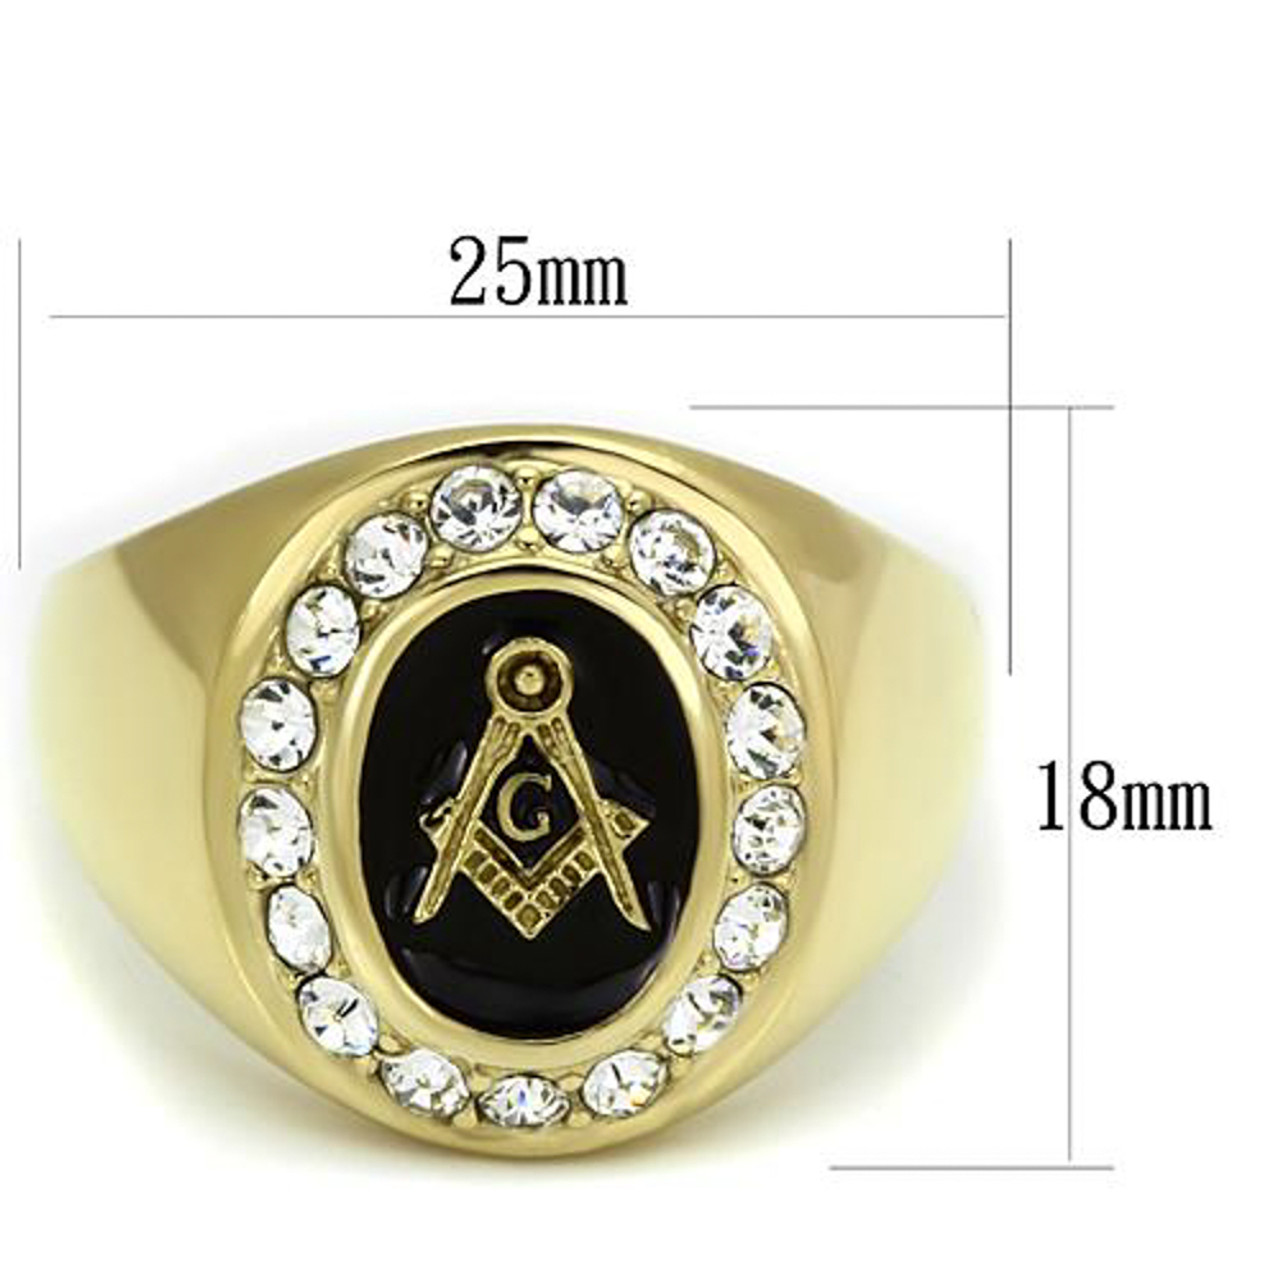 Details about  / HCJ MEN/'S GOLD TONE STAINLESS STEEL OVAL ENAMEL CRYSTAL MASONIC RING SIZE 8-13